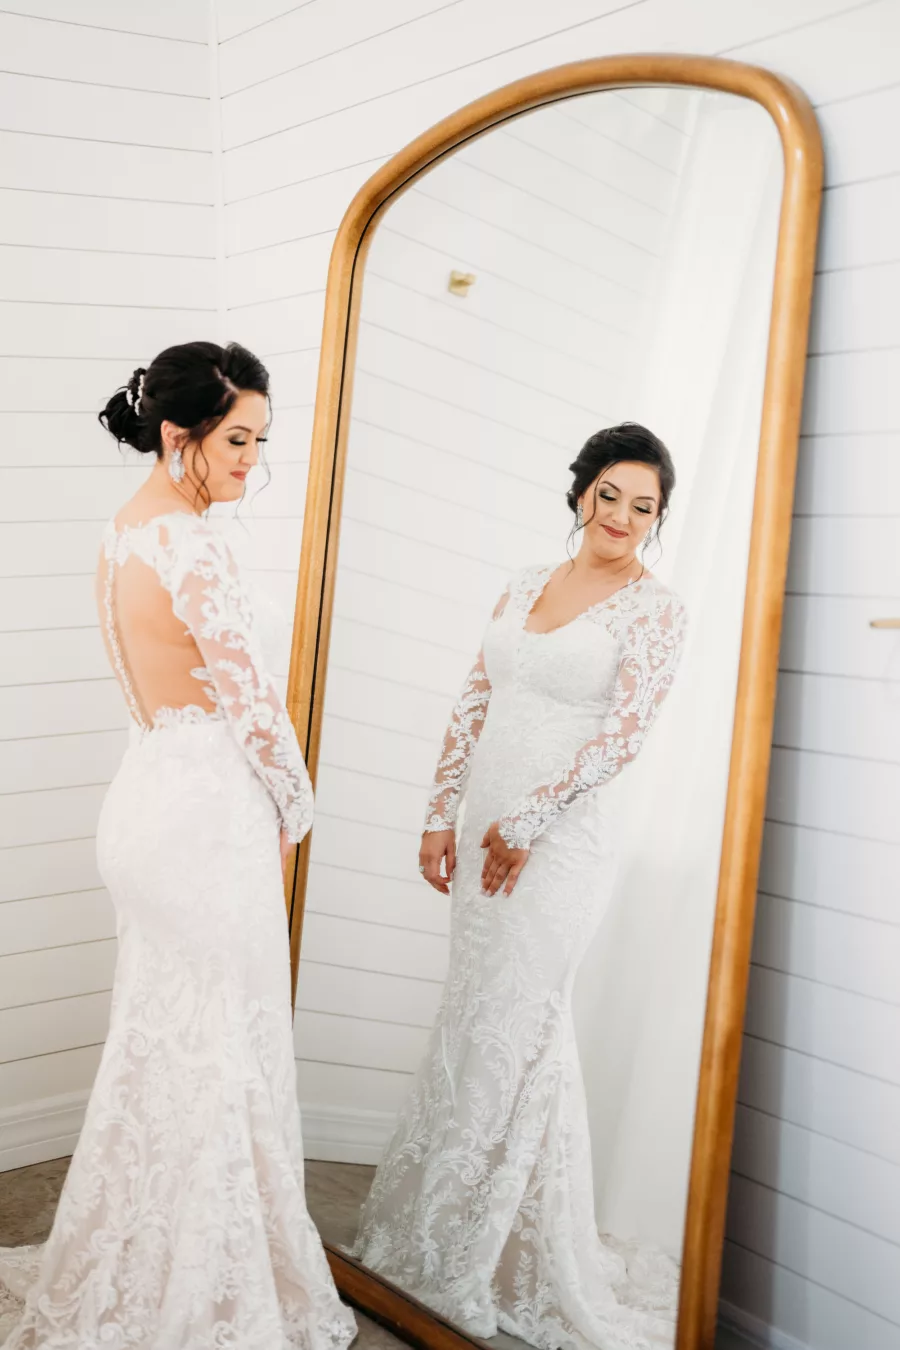 Bride Getting Ready Wedding Portrait | White and Nude Long Sleeve Lace Fit and Flare Wedding Dress with Open Back Ideas